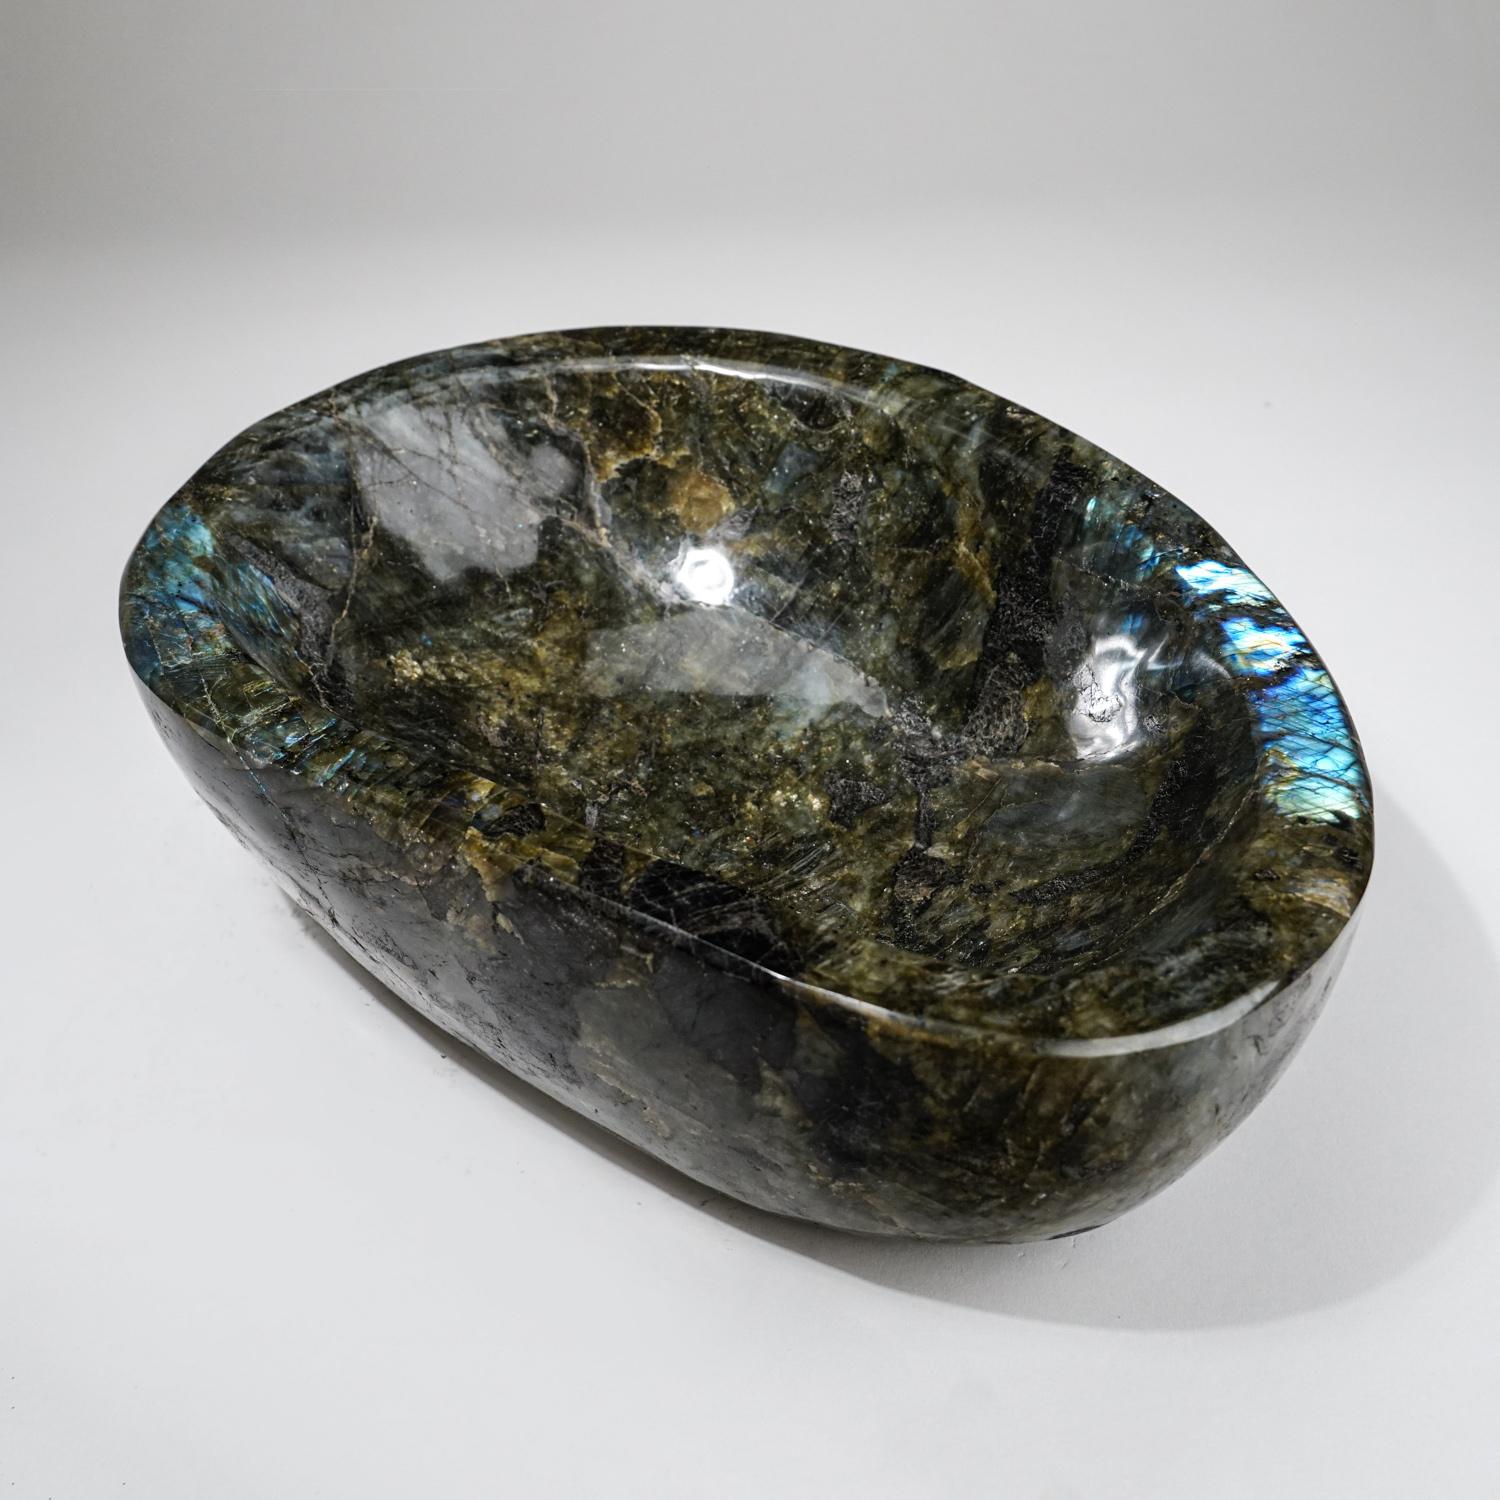 Beautiful hand polished labradorite decorative large bowl from Madagascar. This bowl has a beautiful, iridescent play of colors - blue and yellow which is caused by internal fractures in the mineral that reflect light back and forth, dispersing it